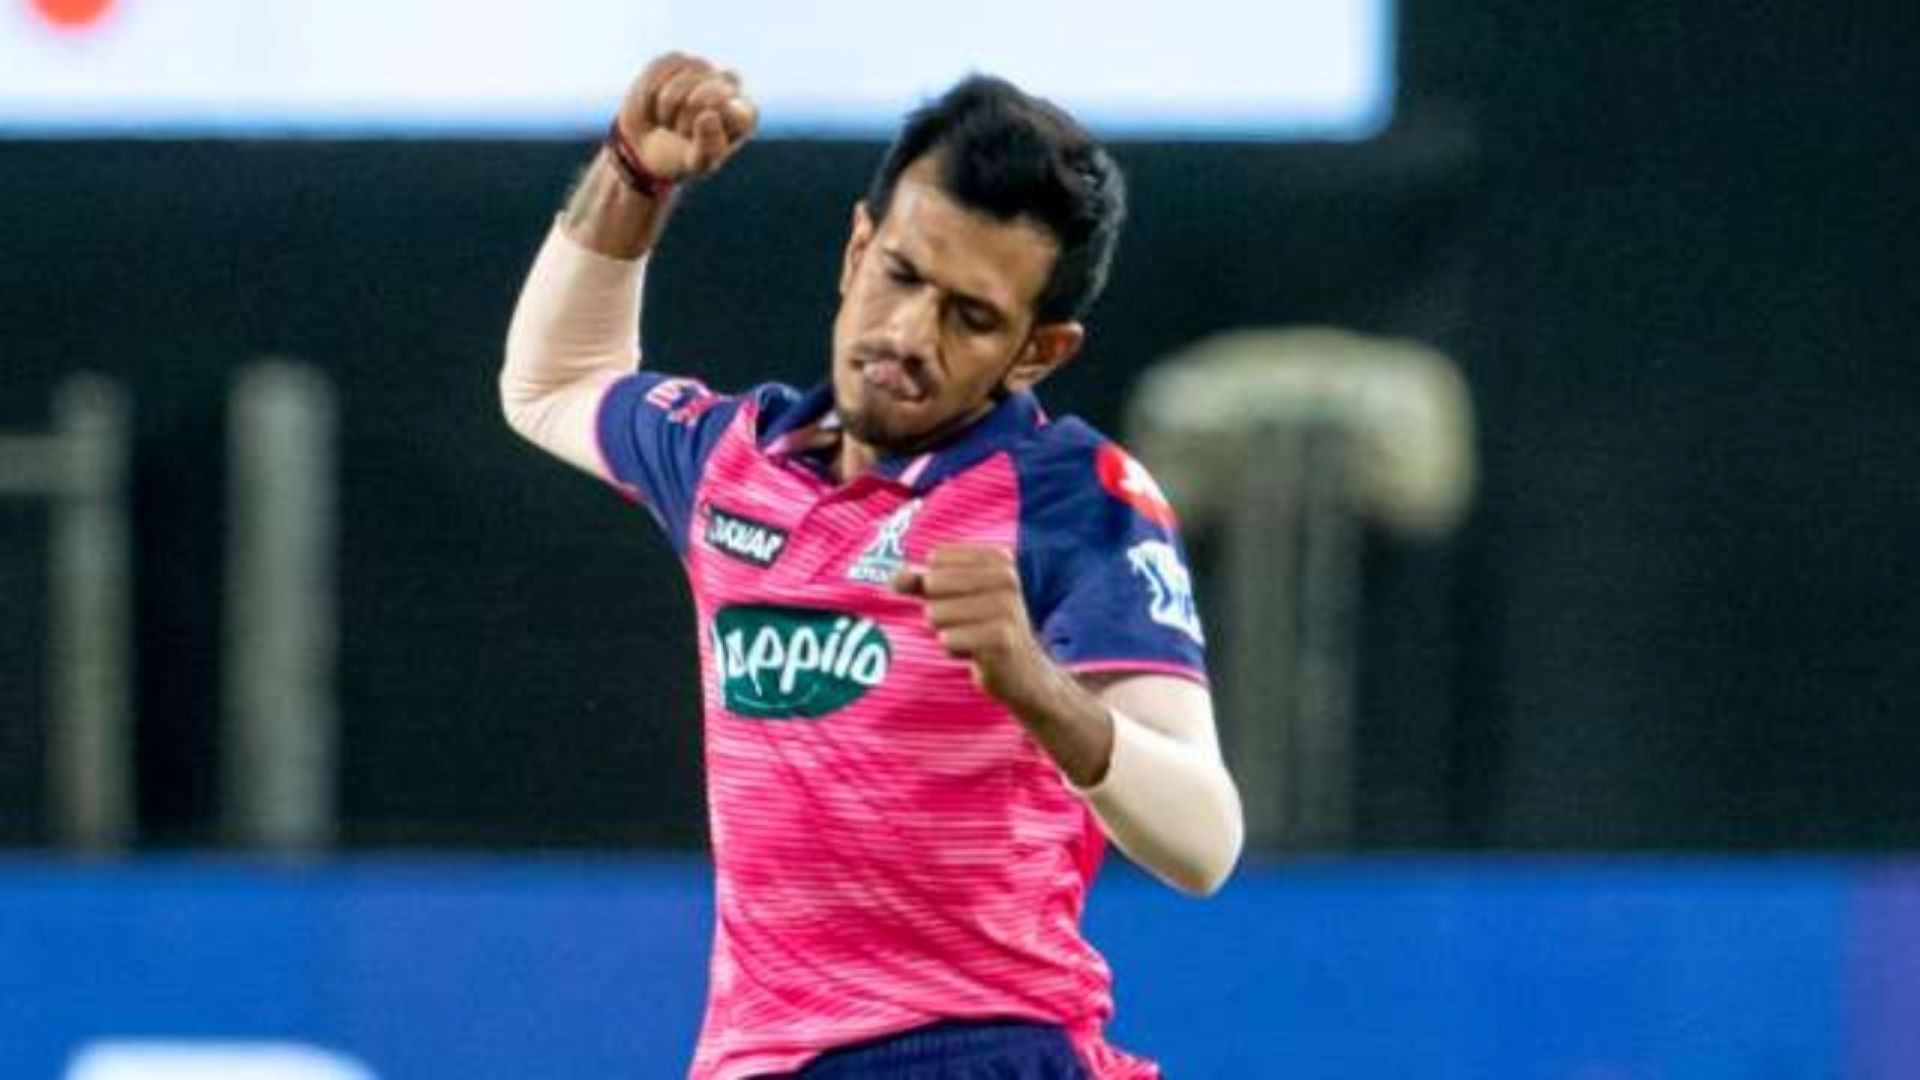 Chahal has been in red-hot form again this season